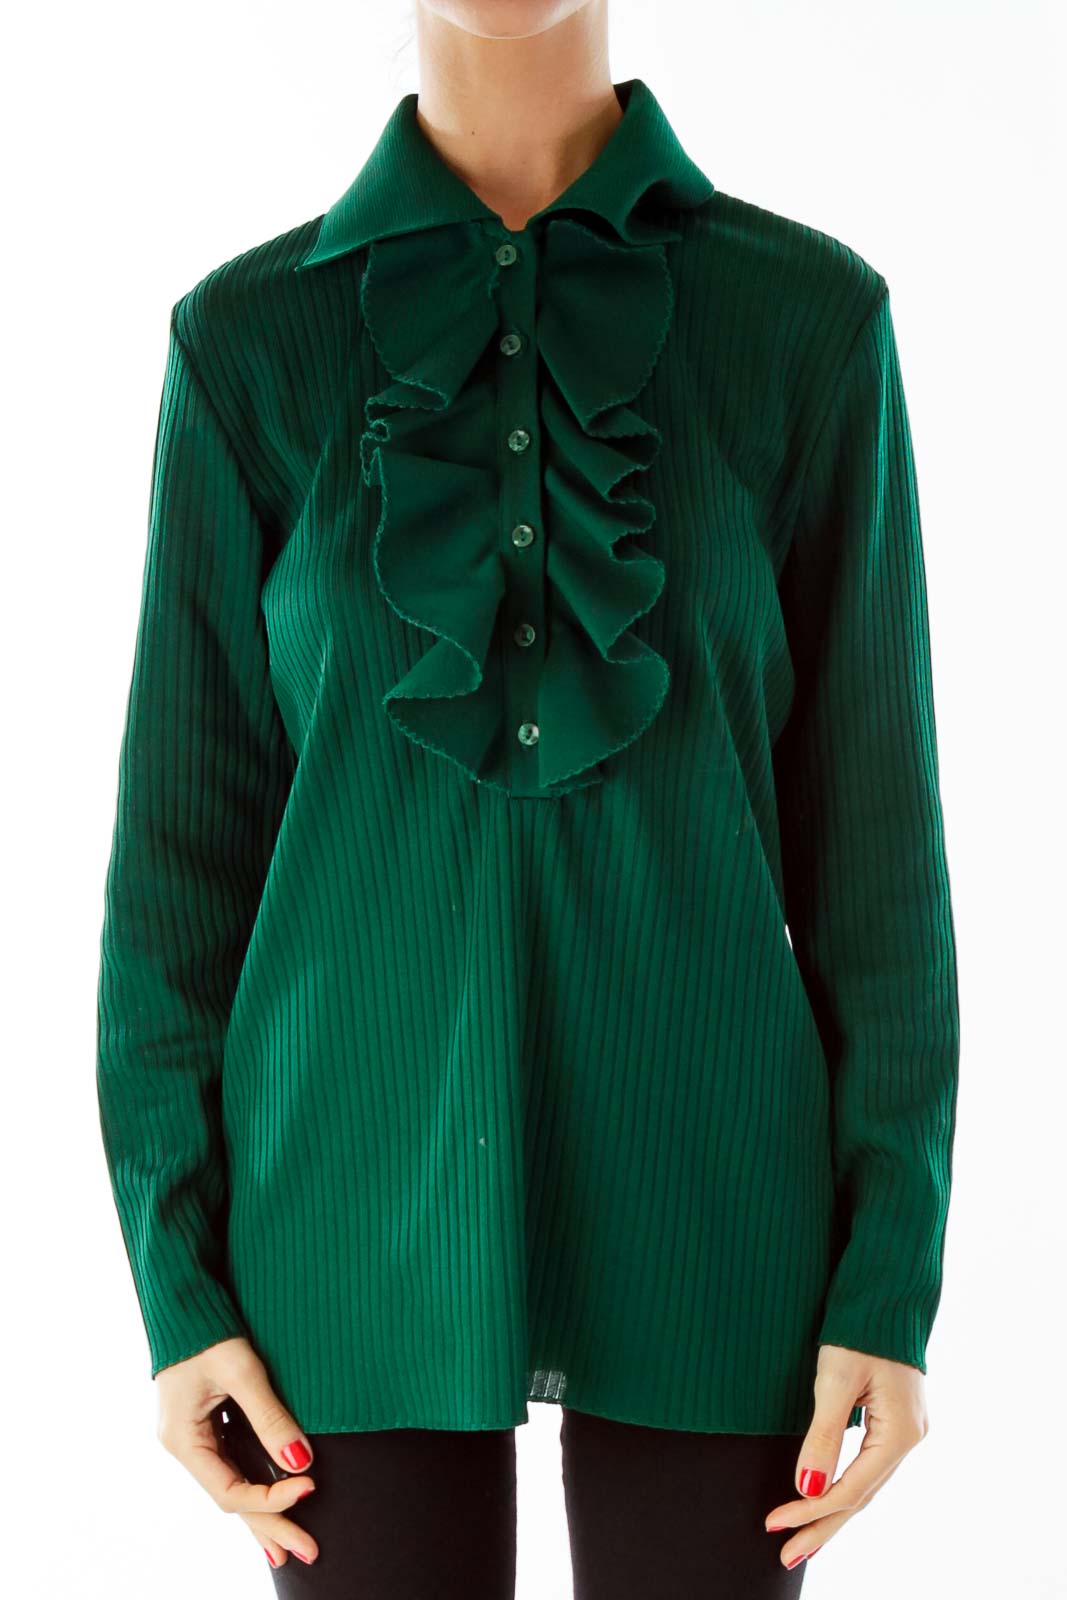 Green Ruffle Vintage Blouse Front